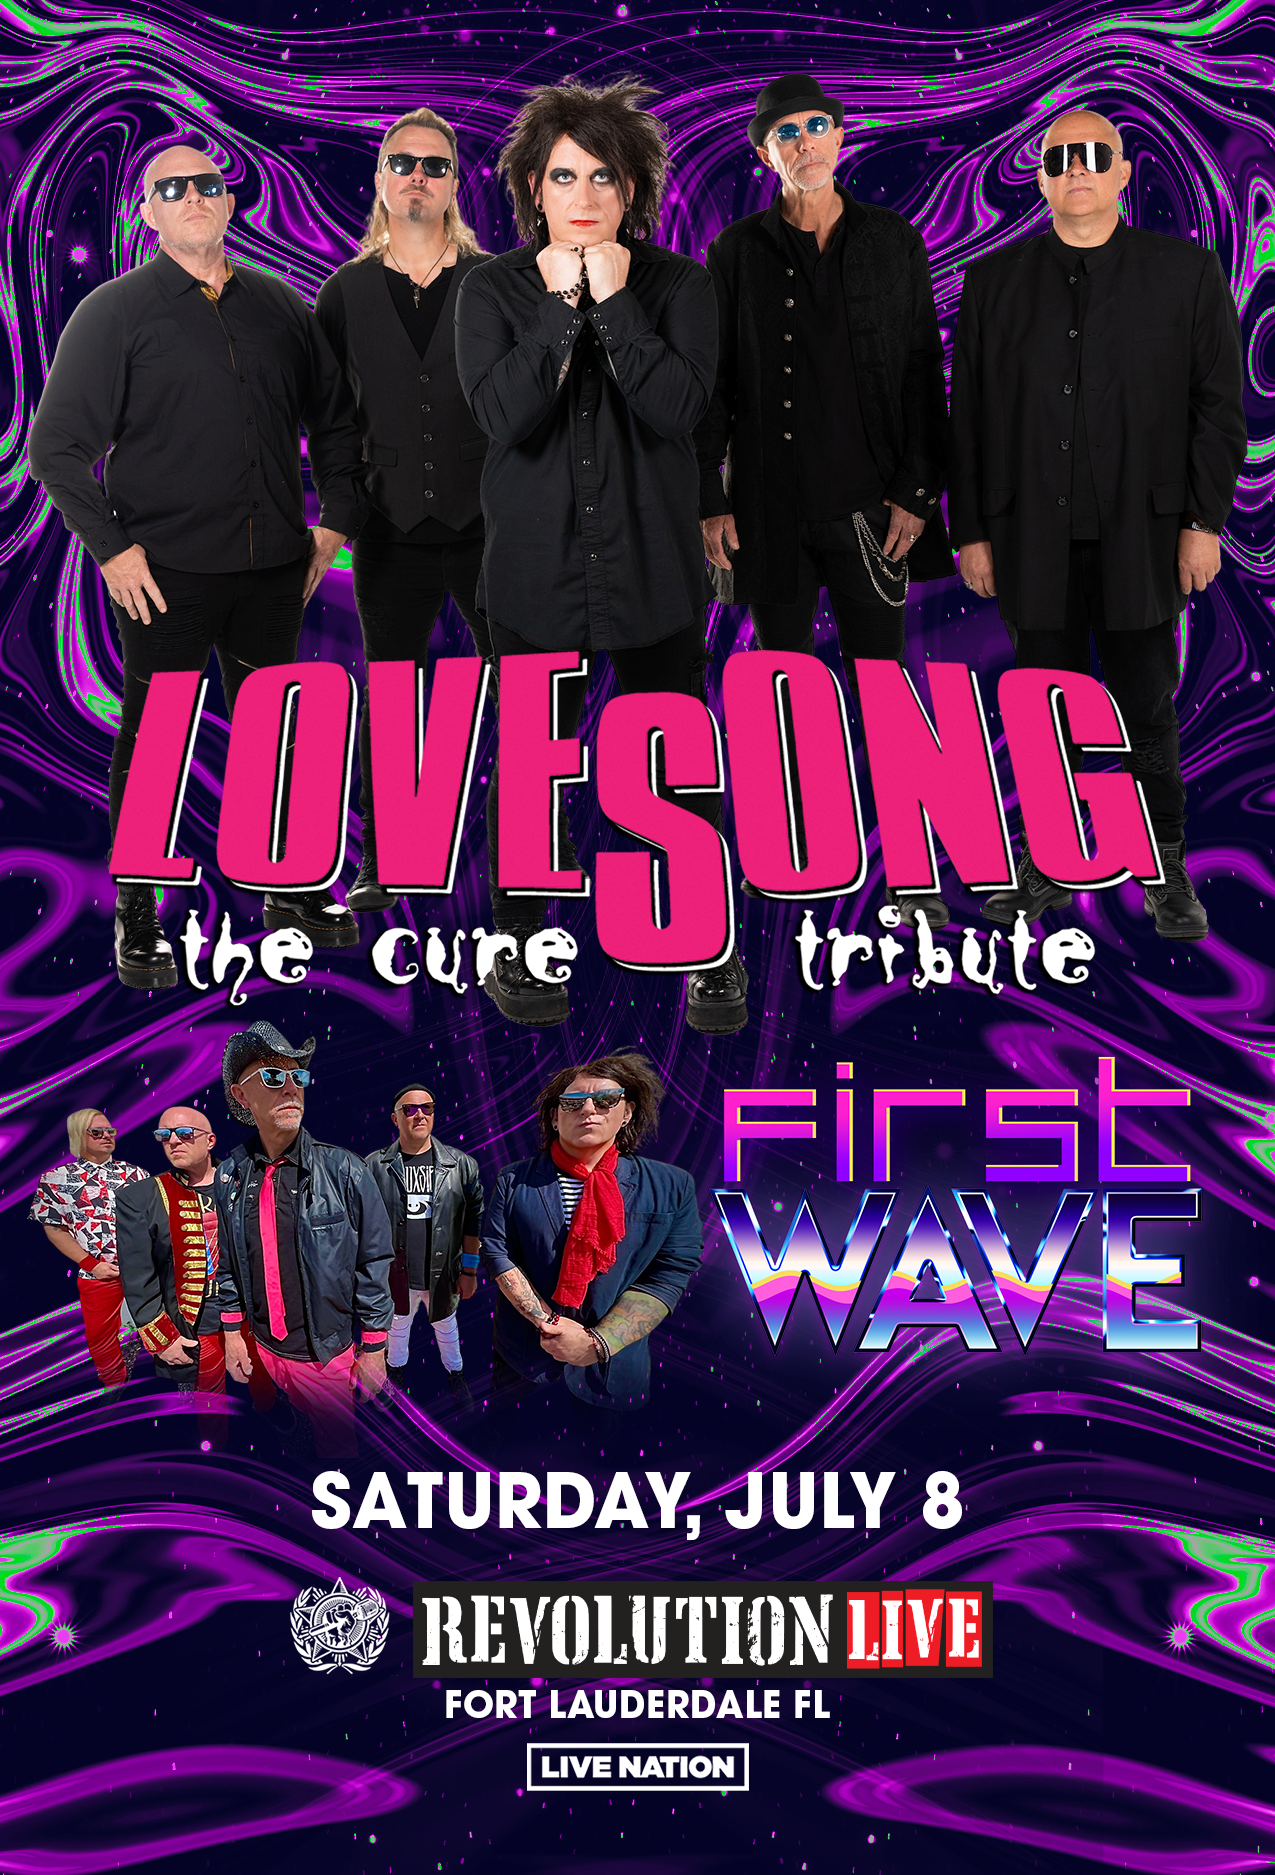 Lovesong: The Cure Tribute and First Wave